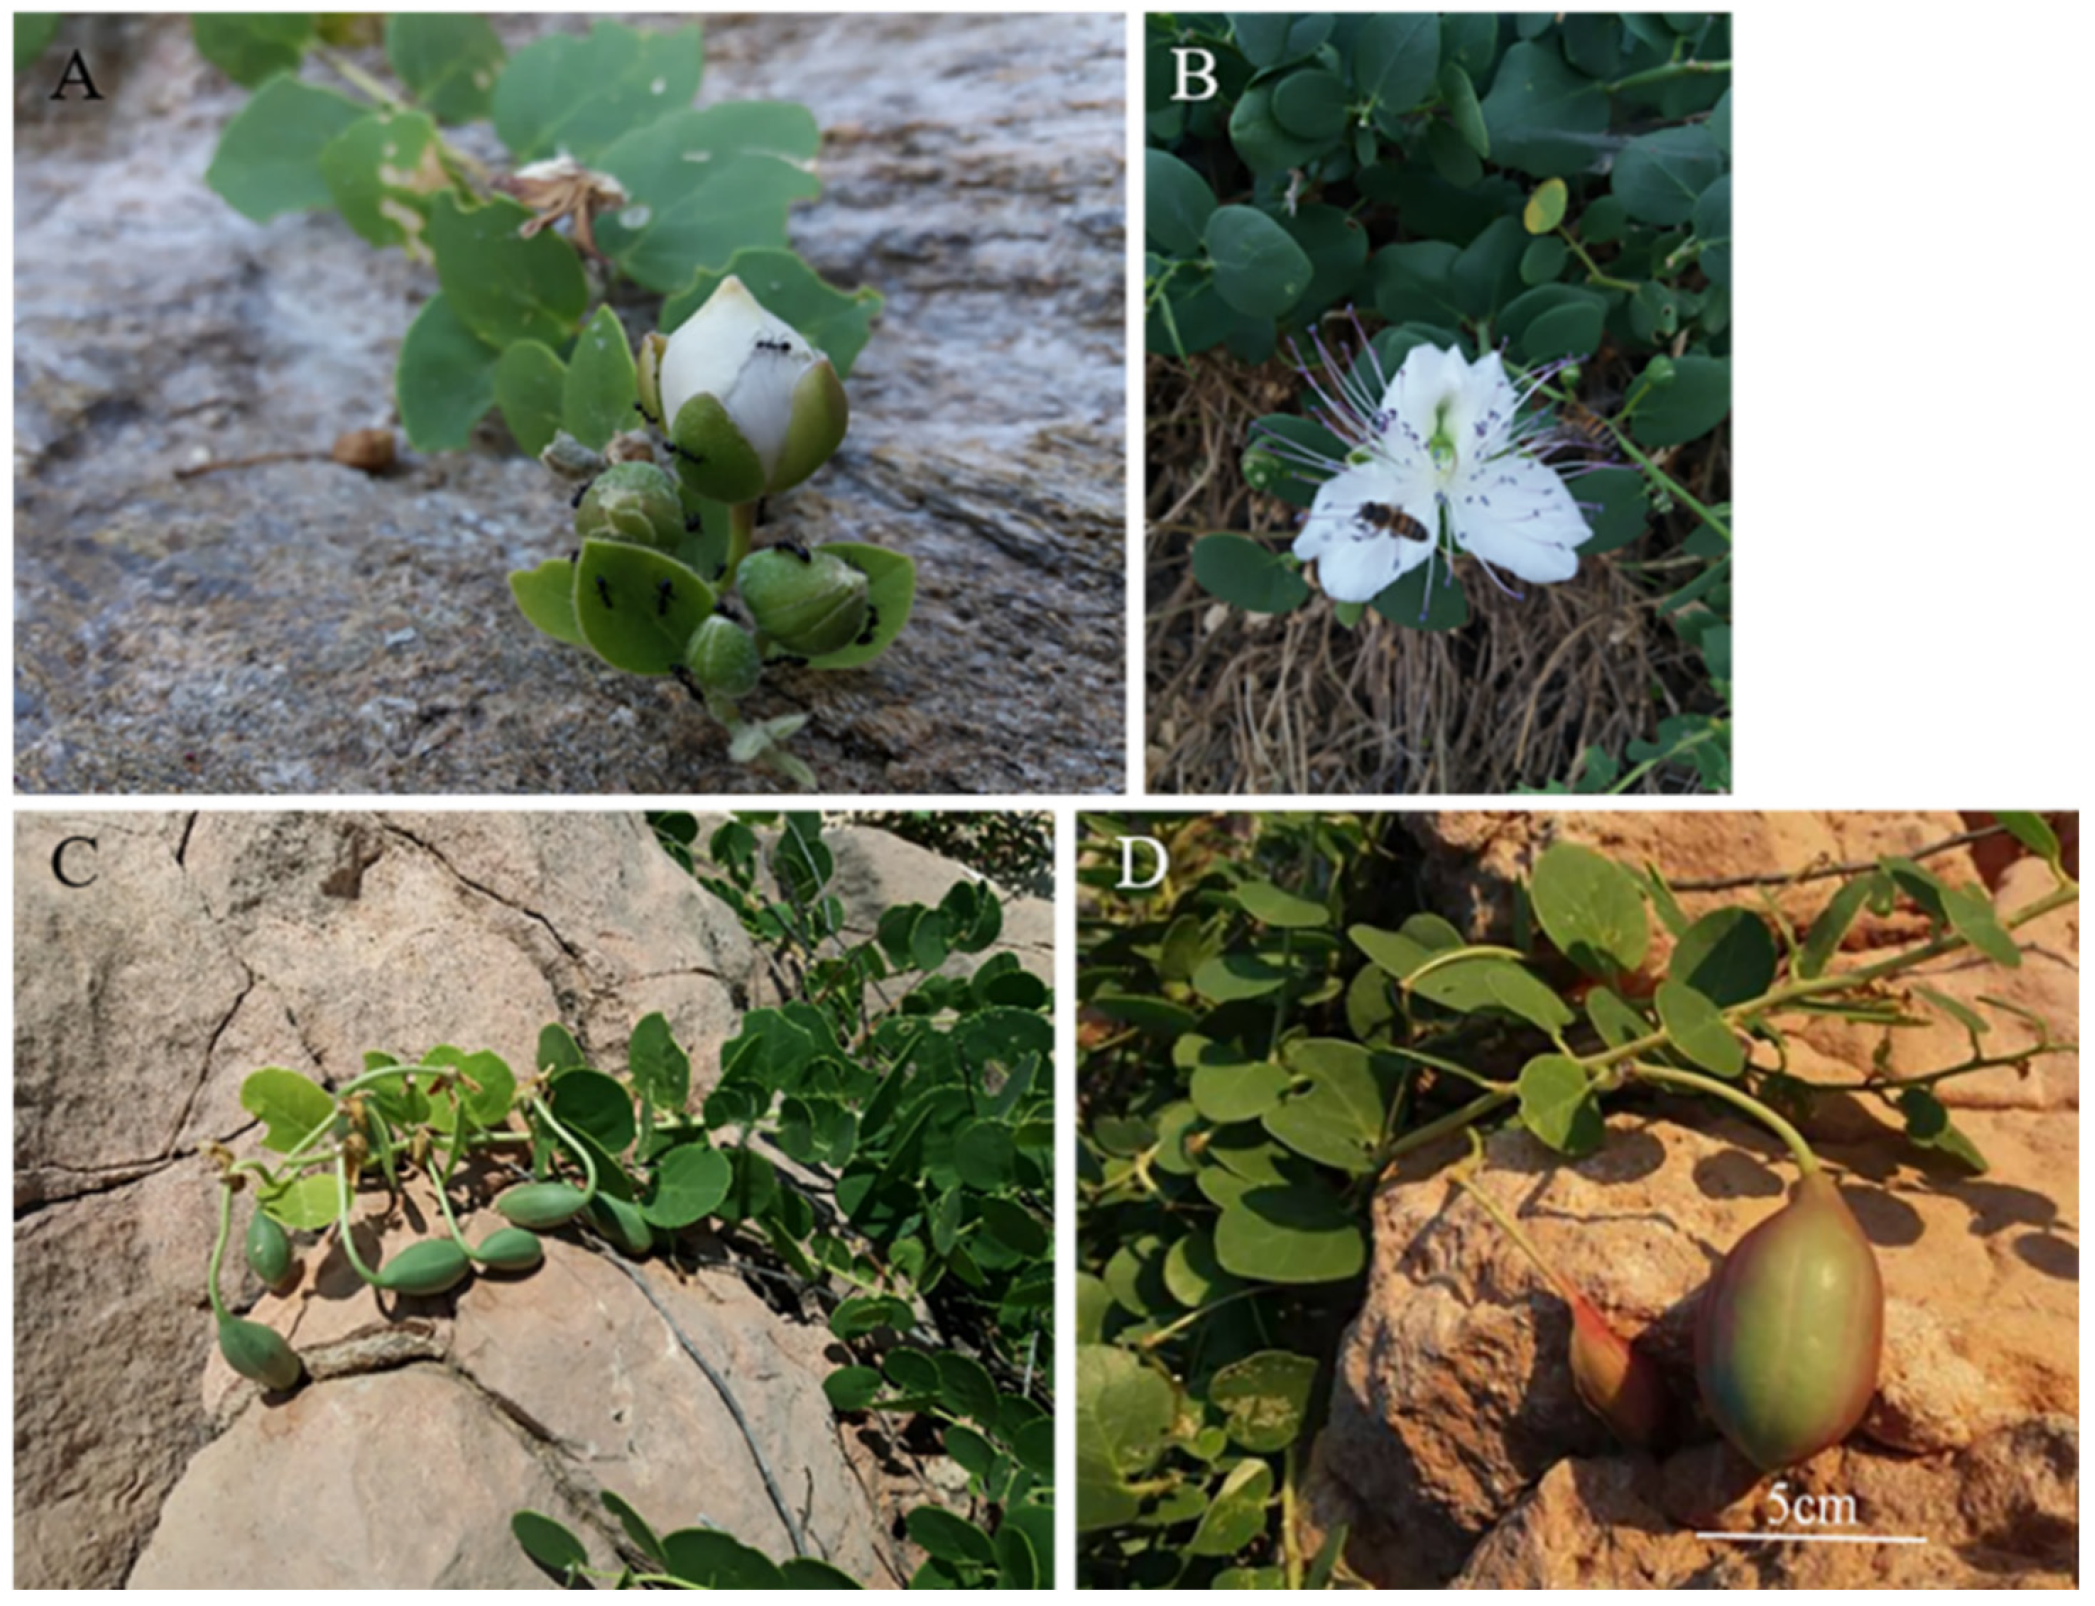 Plants | Full-Text Comparison of Pericarp Functional Traits in Capparis from Coastal and Inland Mediterranean Habitats